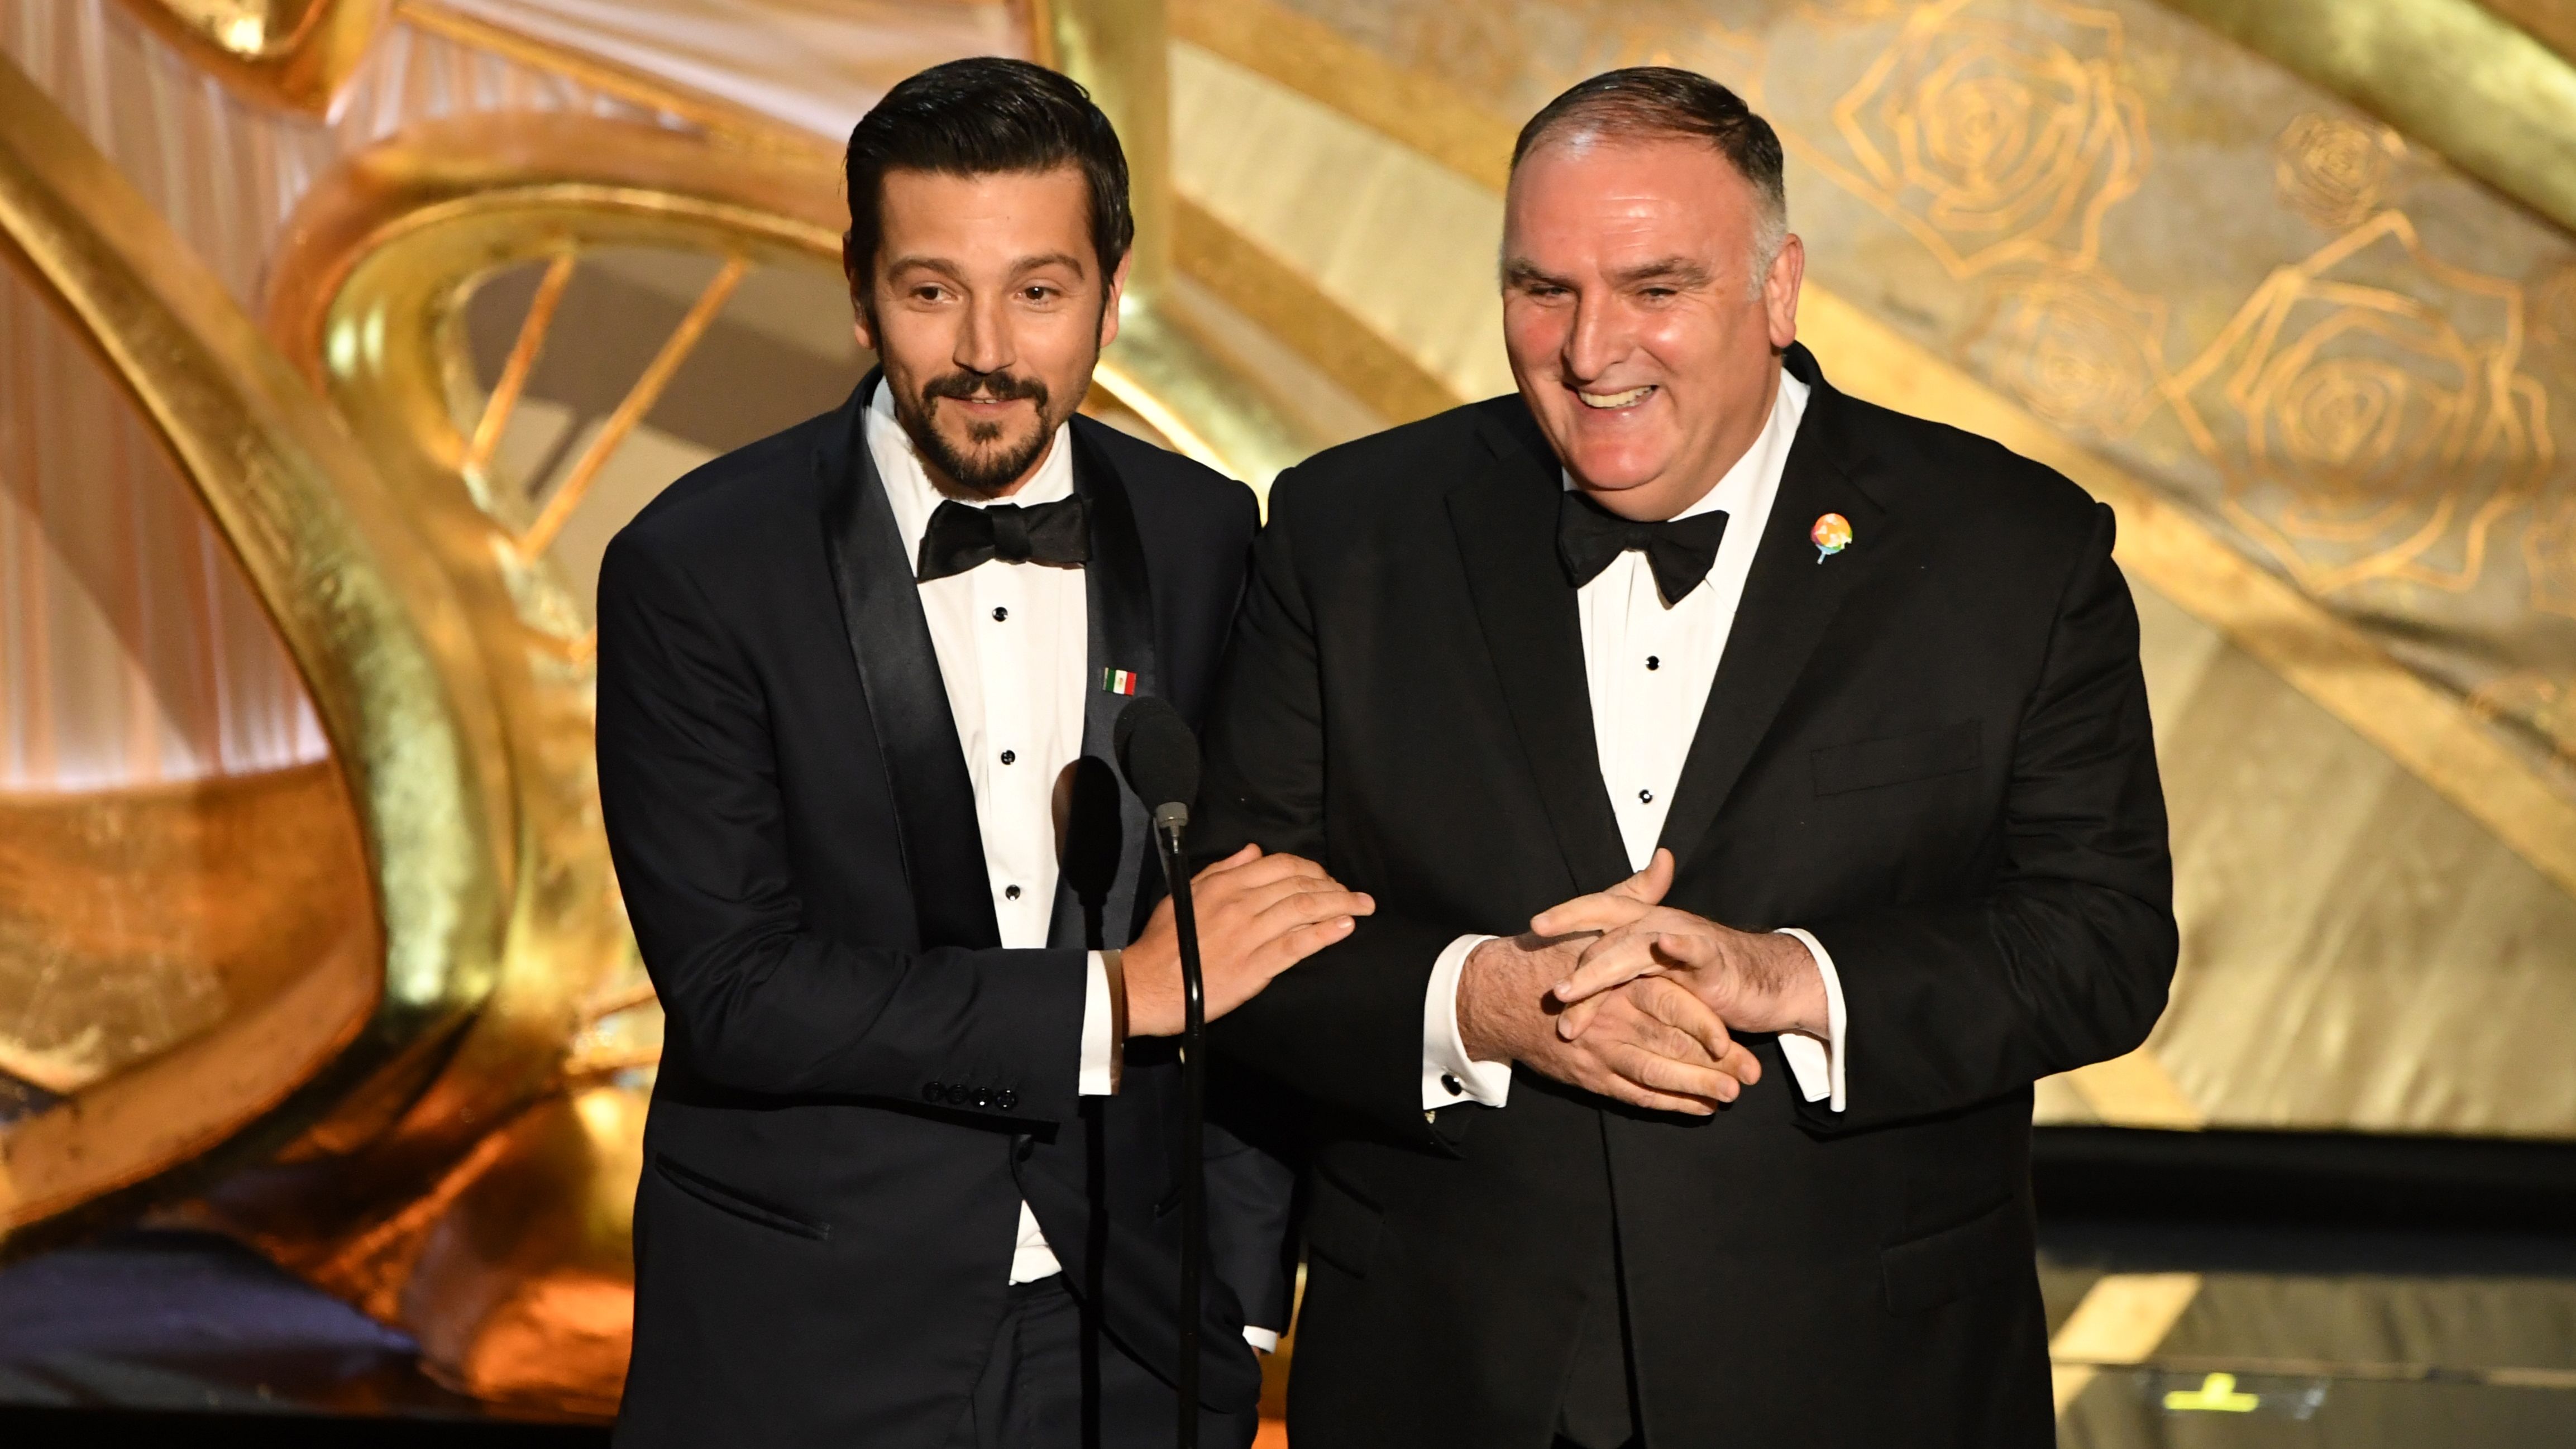 Mexican actor Diego Luna and Chef Jose Andres (L) during the 91st Annual Academy Awards at the Dolby Theatre in Hollywood, California on February 24, 2019. 